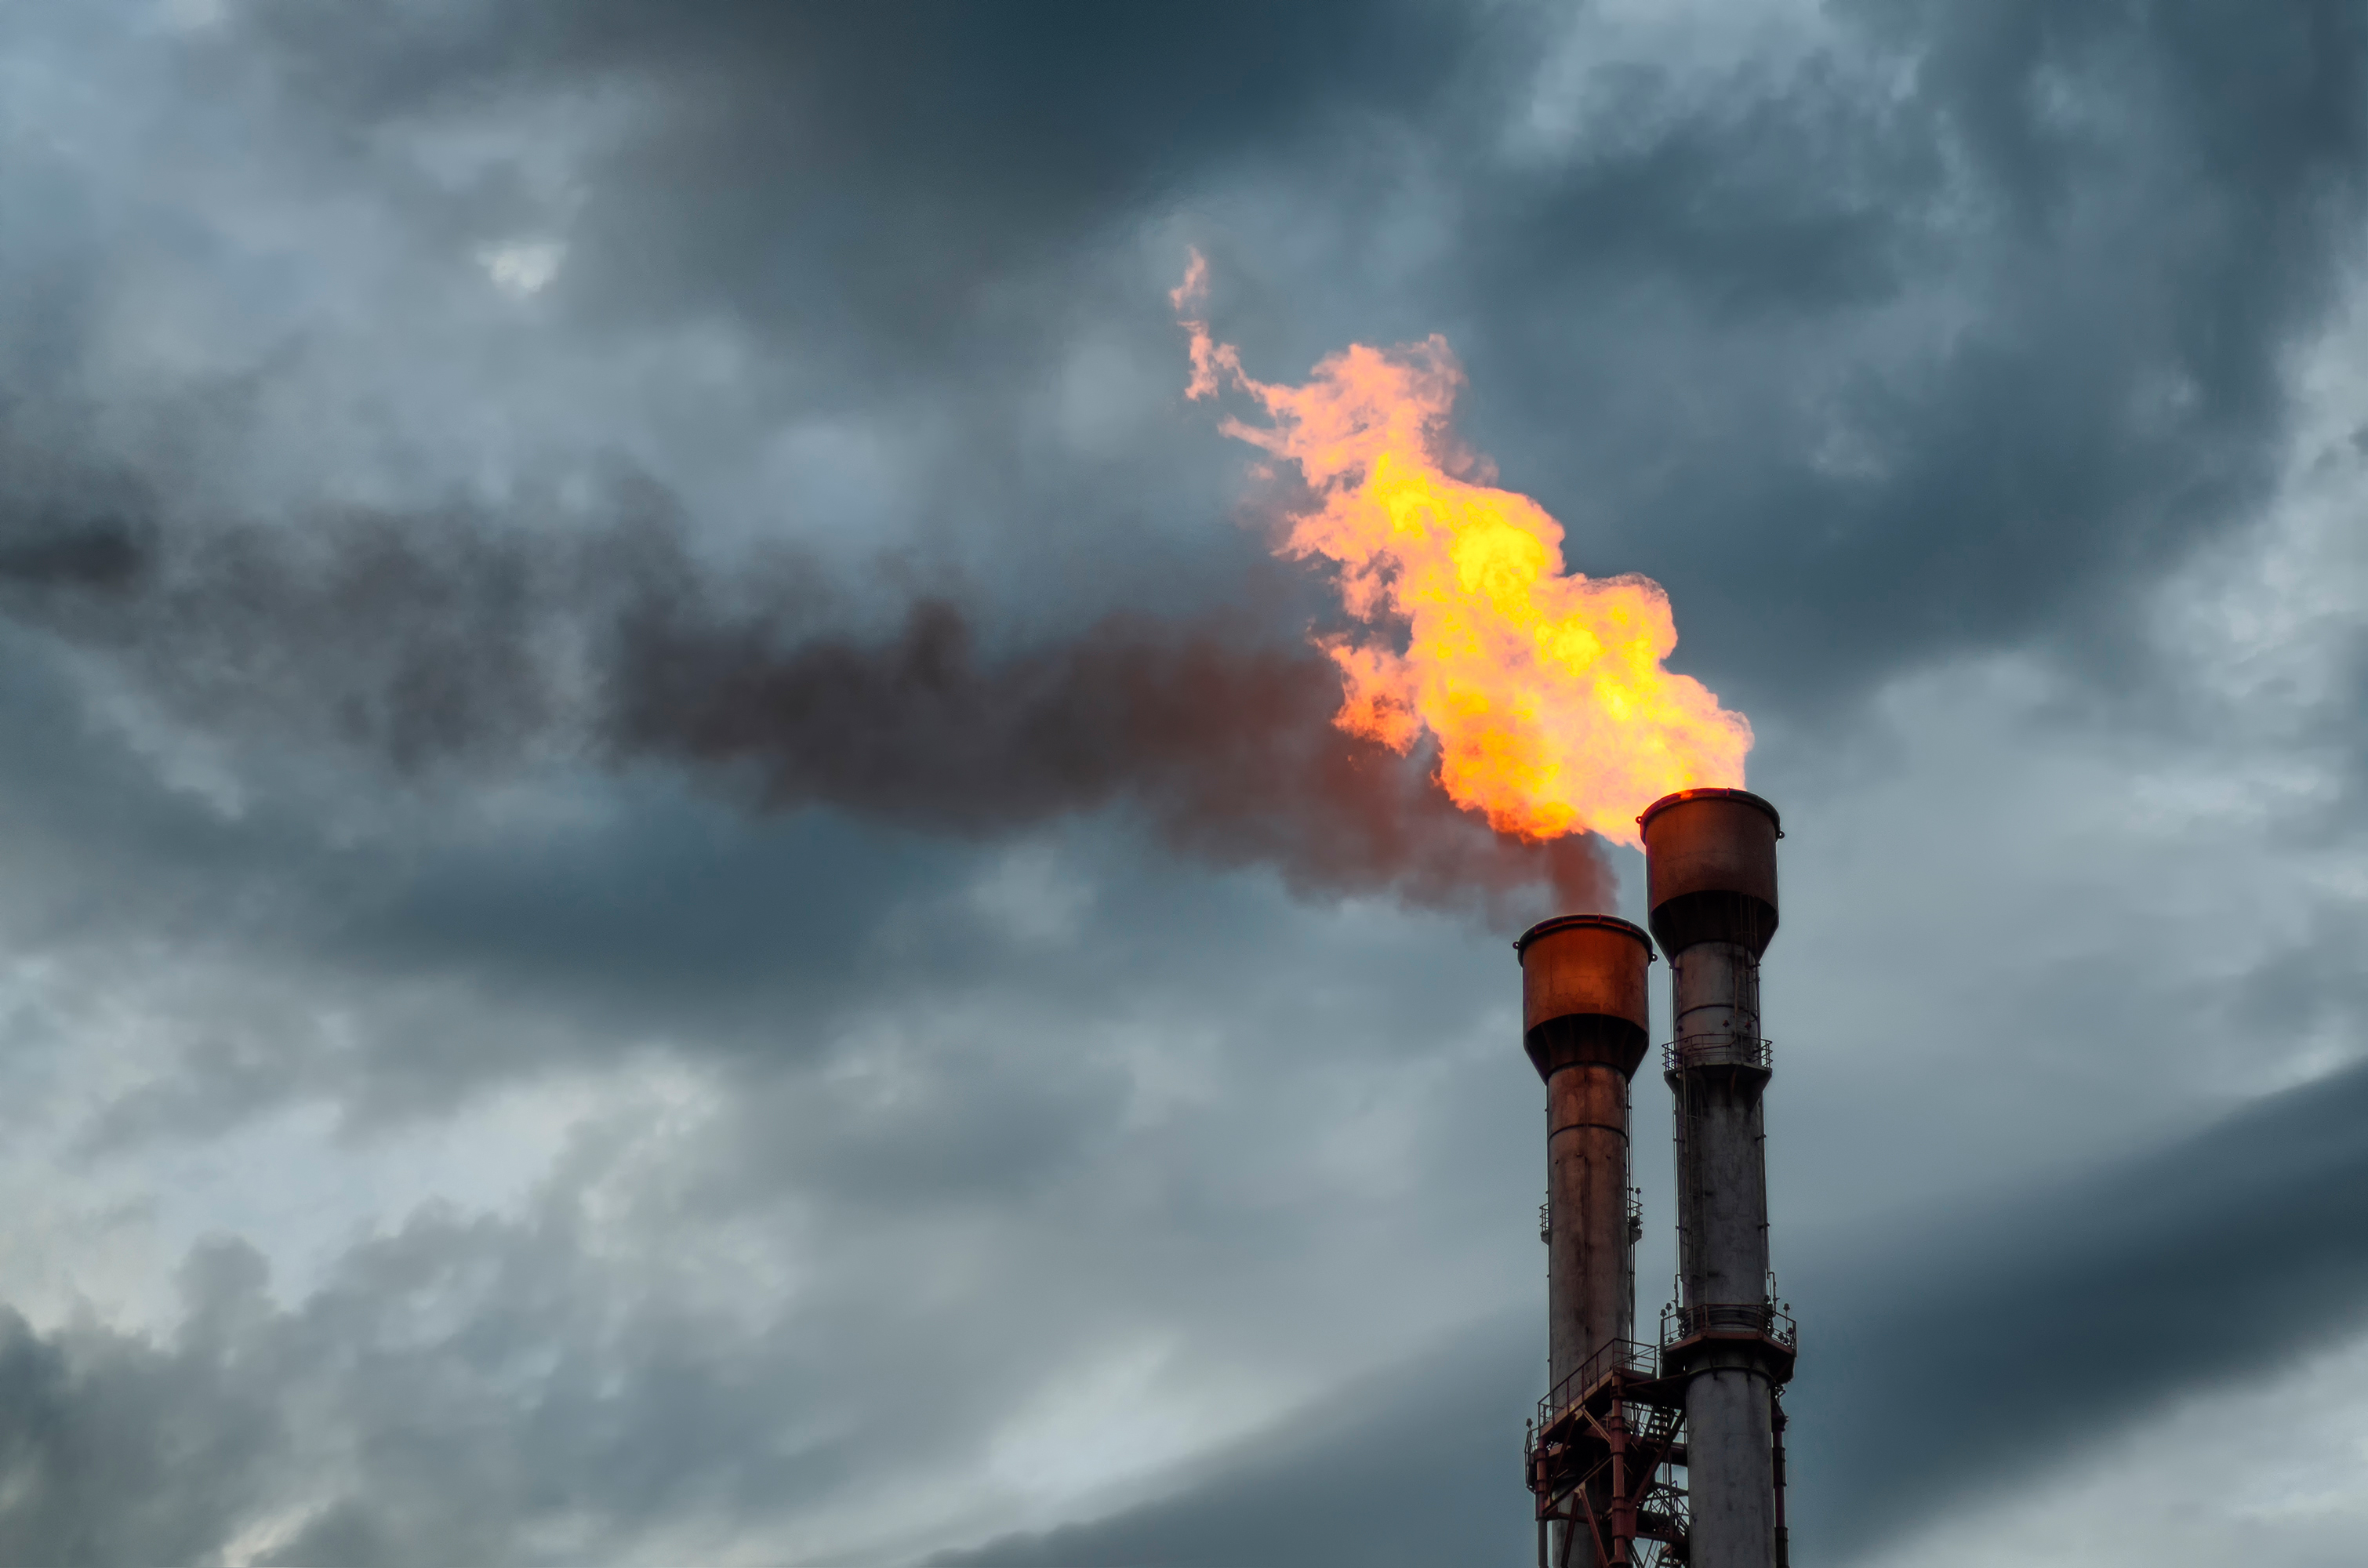 Energy companies in focus on methane emissions